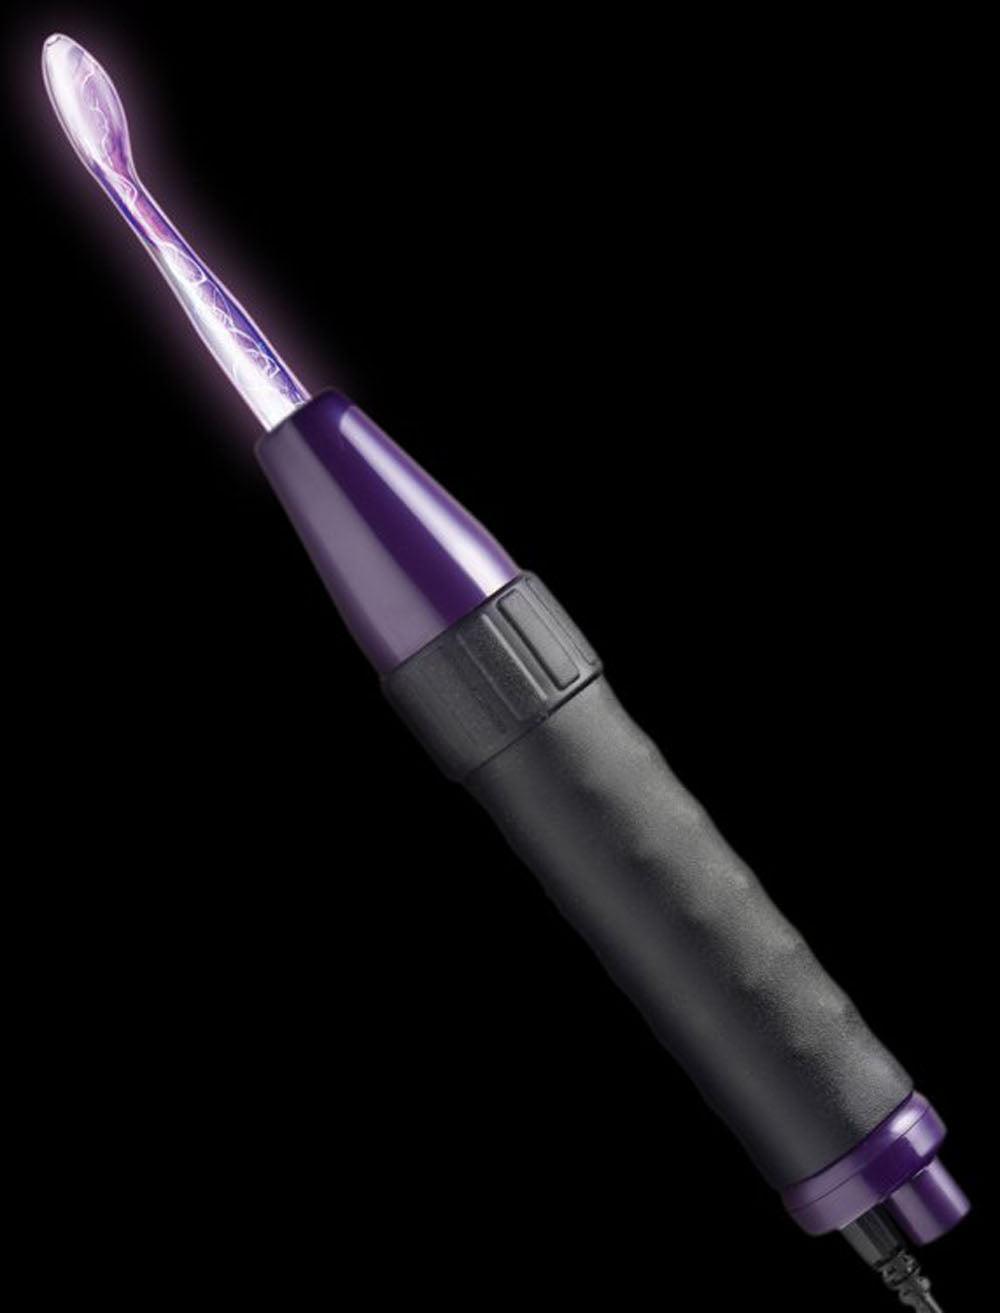 Zeus Deluxe Edition Twilight Violet Wand Kit - My Sex Toy Hub